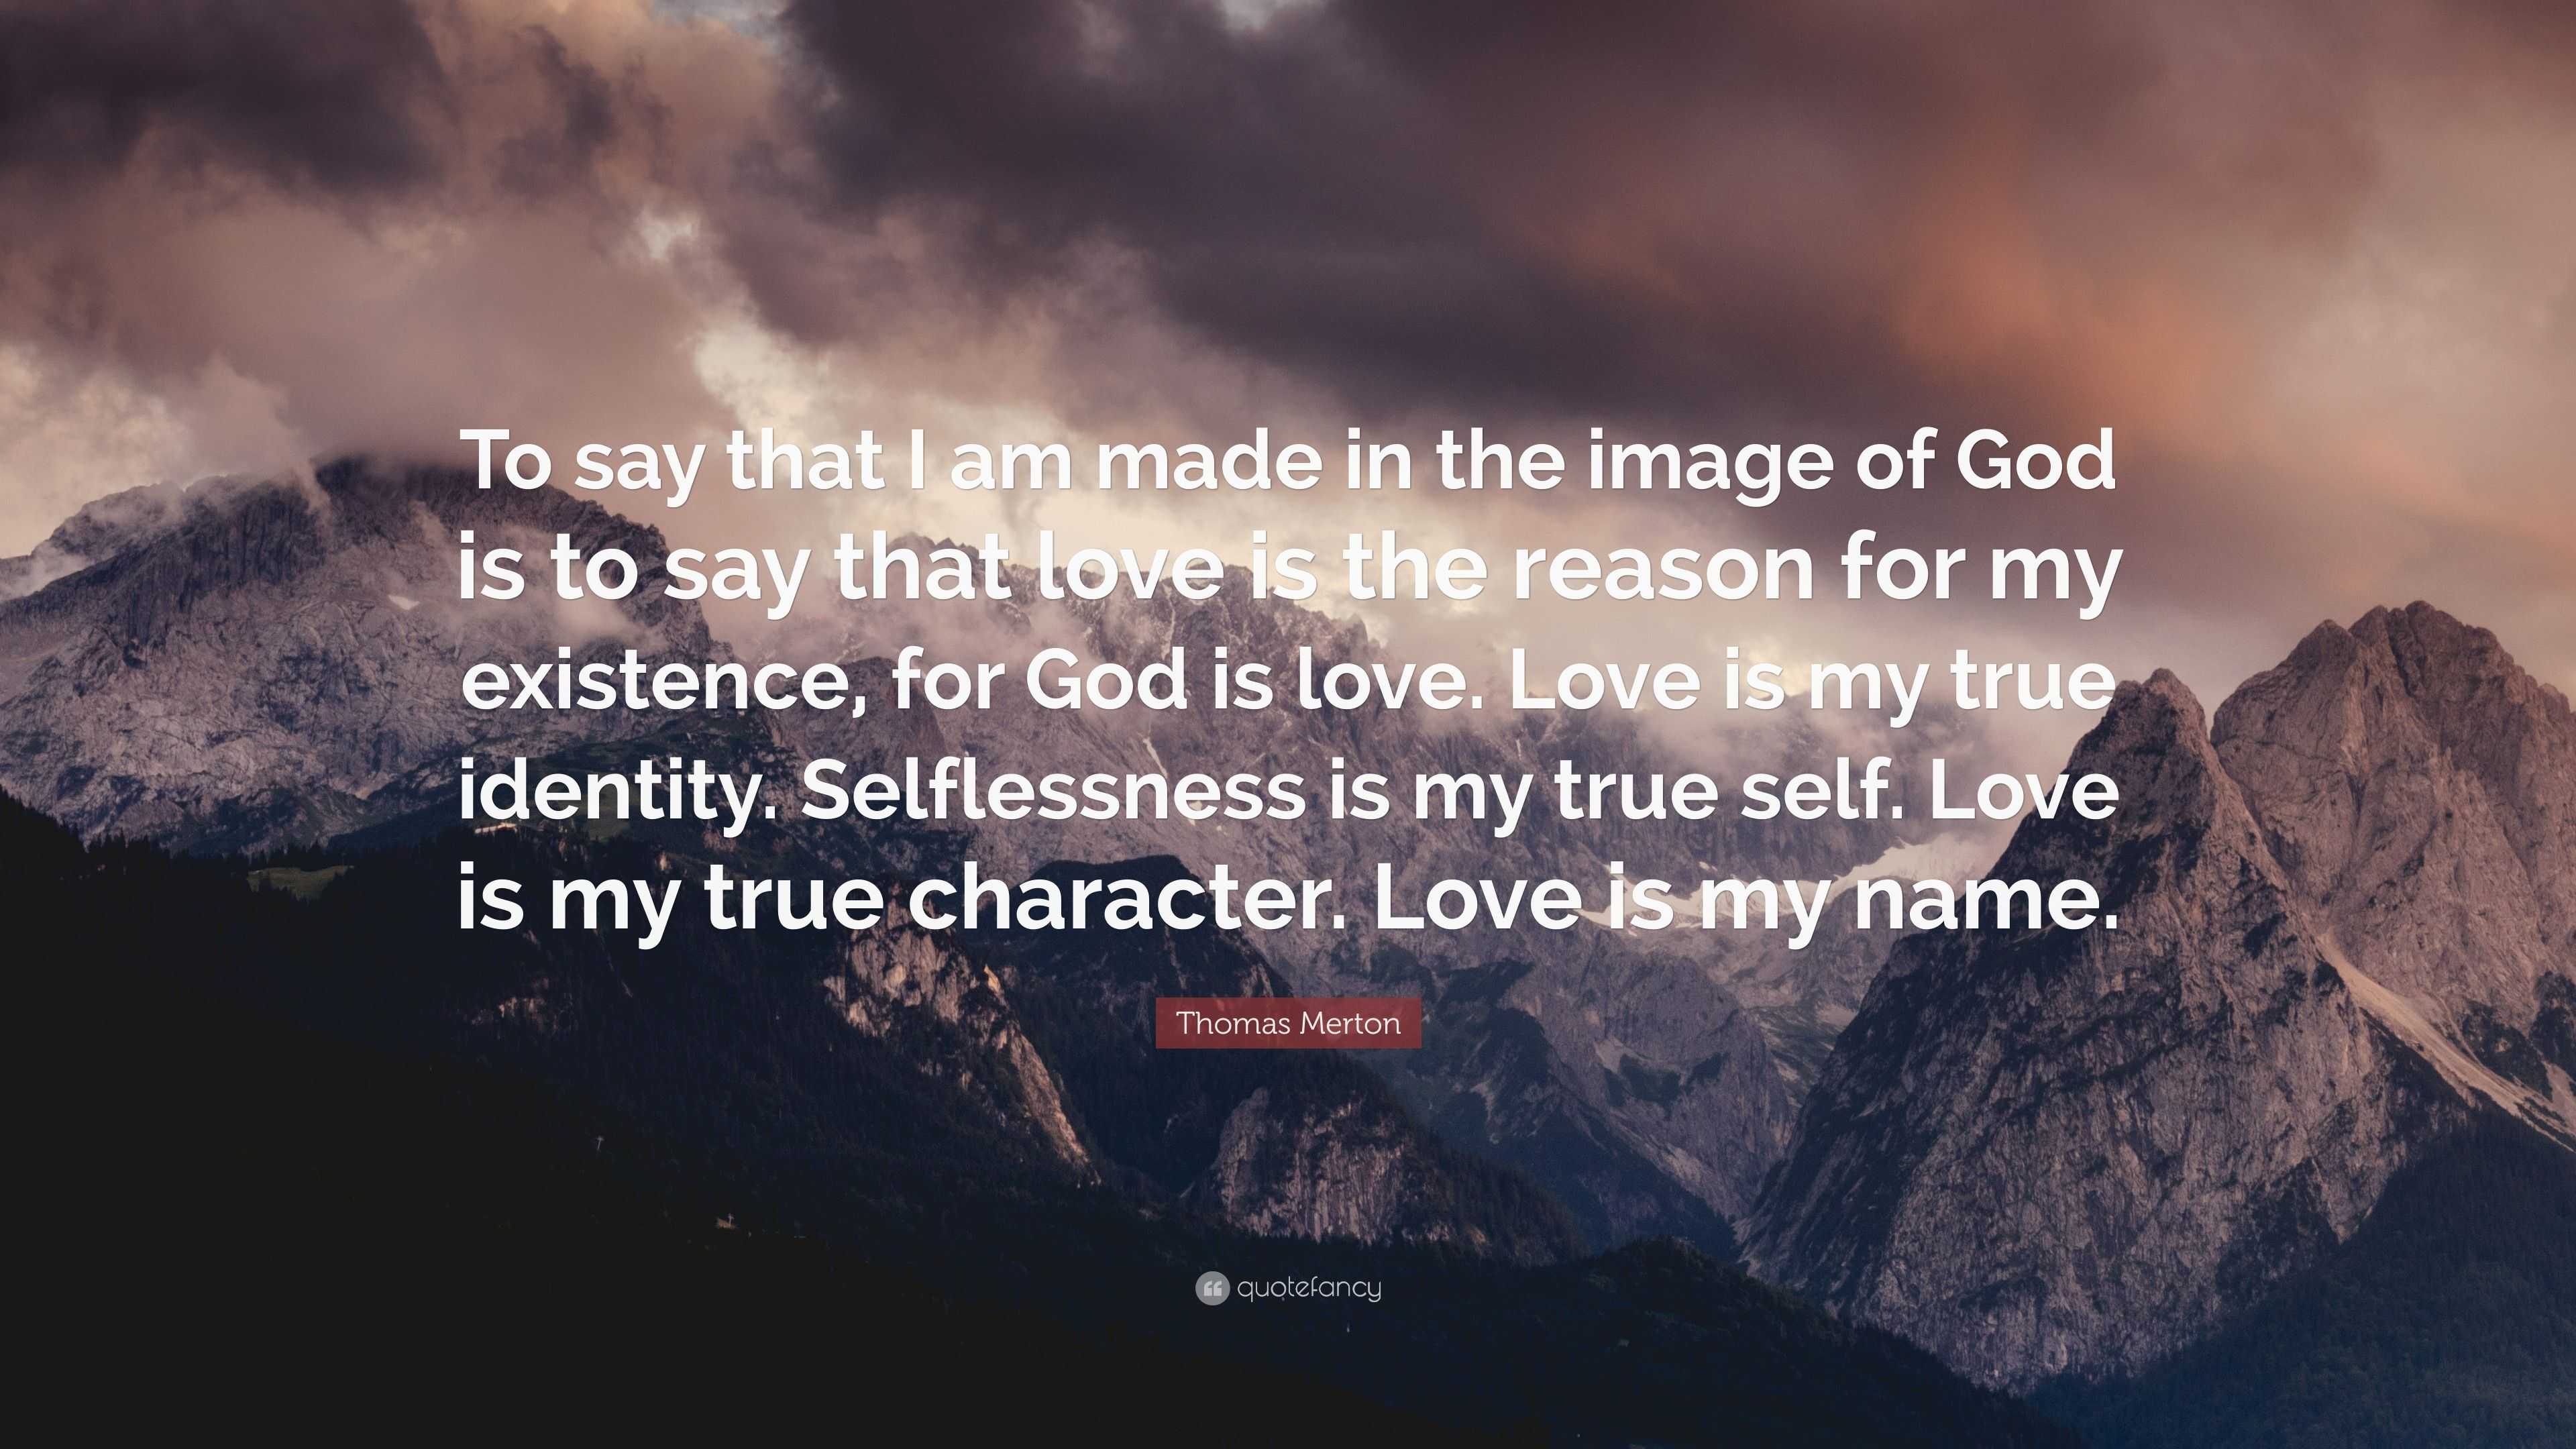 Thomas Merton Quote: "To say that I am made in the image of God is to say that love is the ...